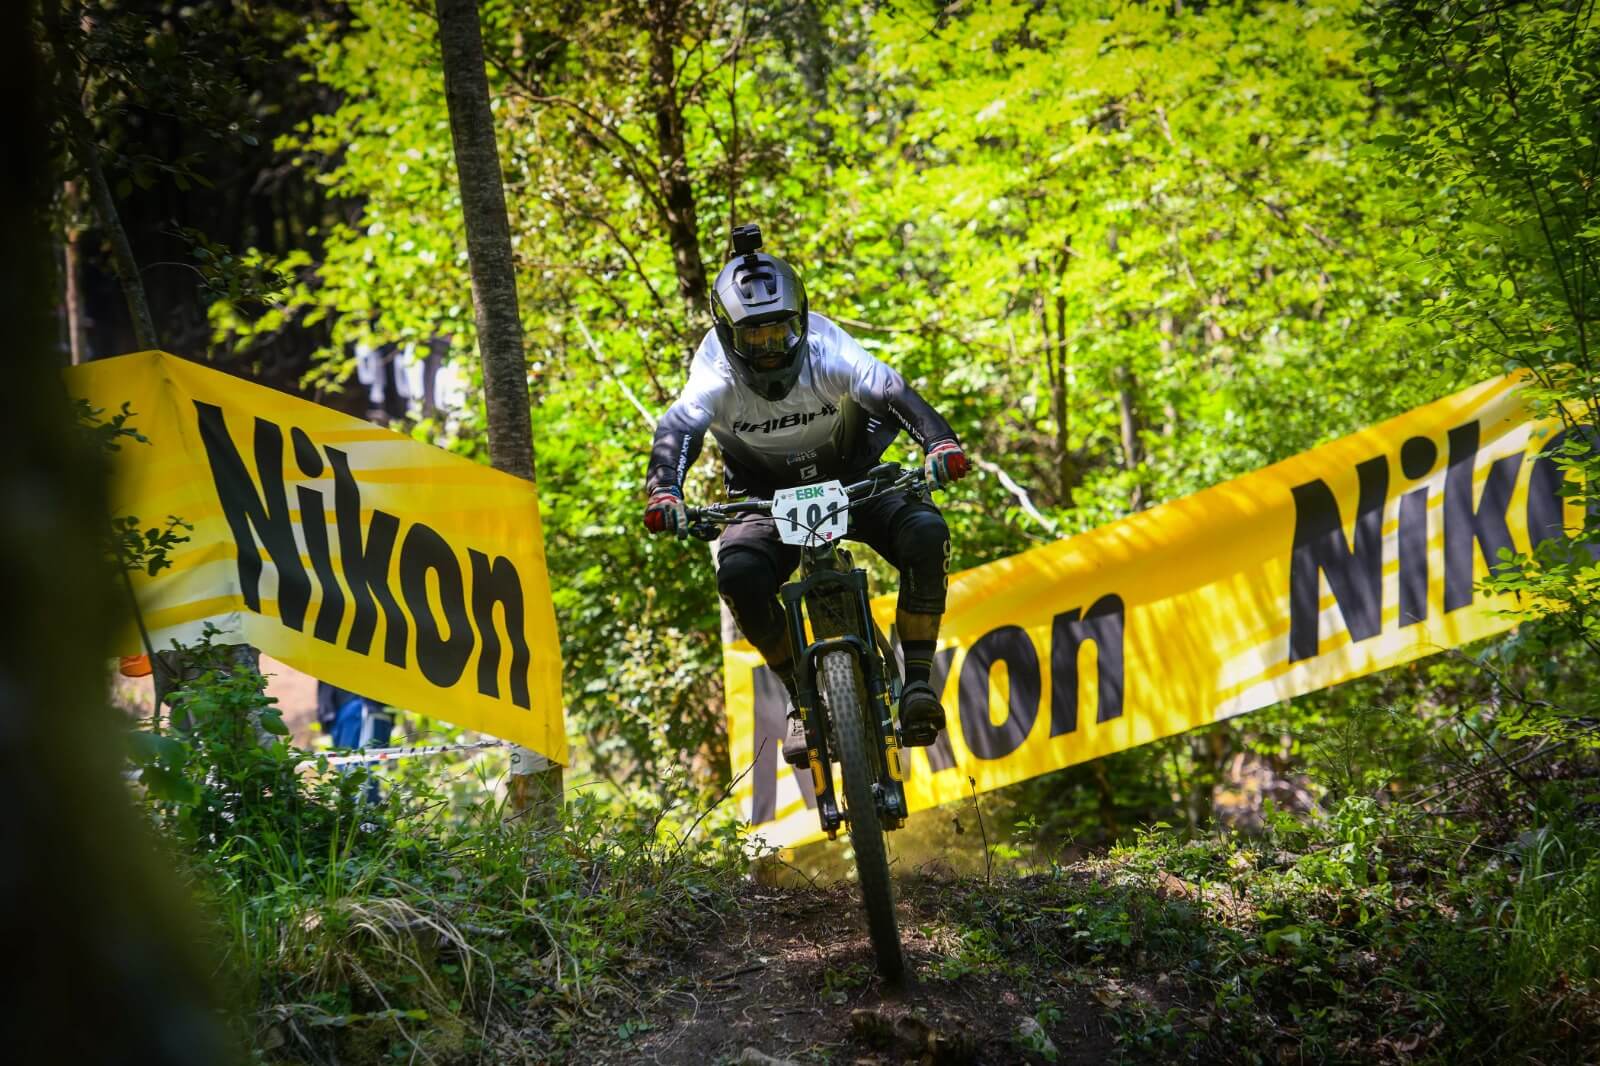 Haibike Hero Andrea Garibbo riding through a forest during the Enduro World Series